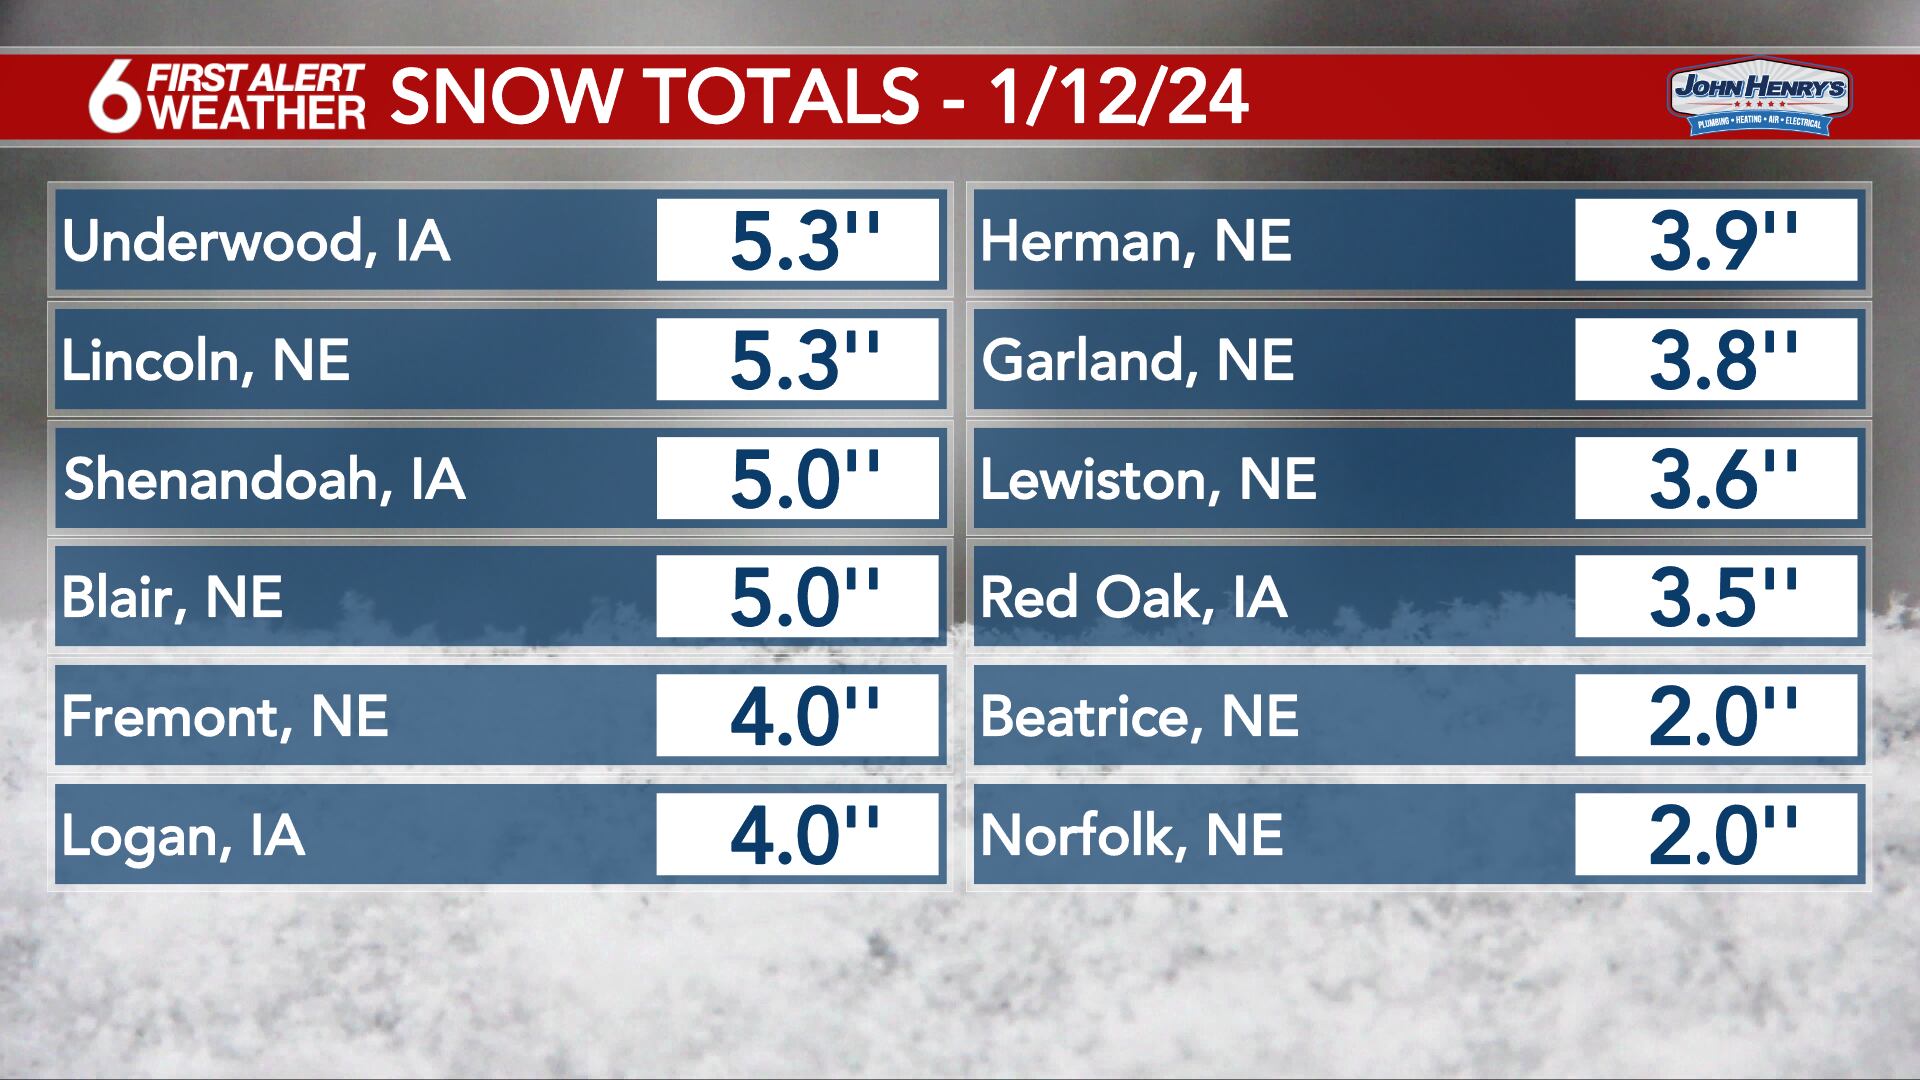 current snow totals from friday’s winter storm in omaha